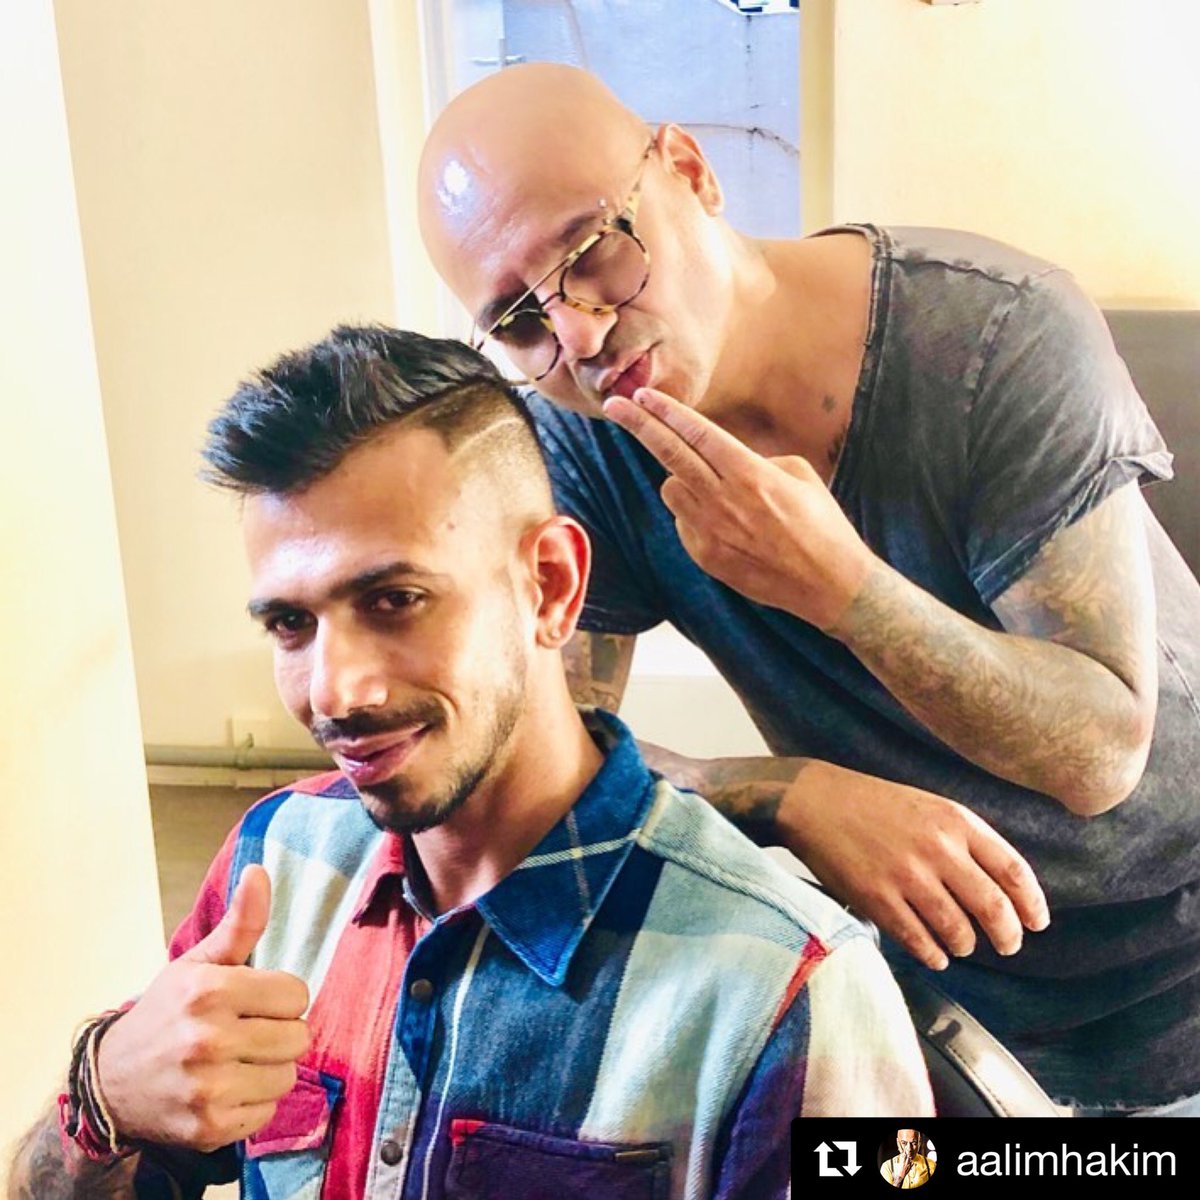 Aalim Hakim on Twitter: "And the haircut session continues... For the super  talented Yuzvendra Singh Chahal @yuzi_chahal ♠️ in LONDON 🤘 #worldcup2019  #yuzvendrachahal #cricket #london #england🇬🇧 #aalimhakim  https://t.co/aY5VExvcNJ" / Twitter